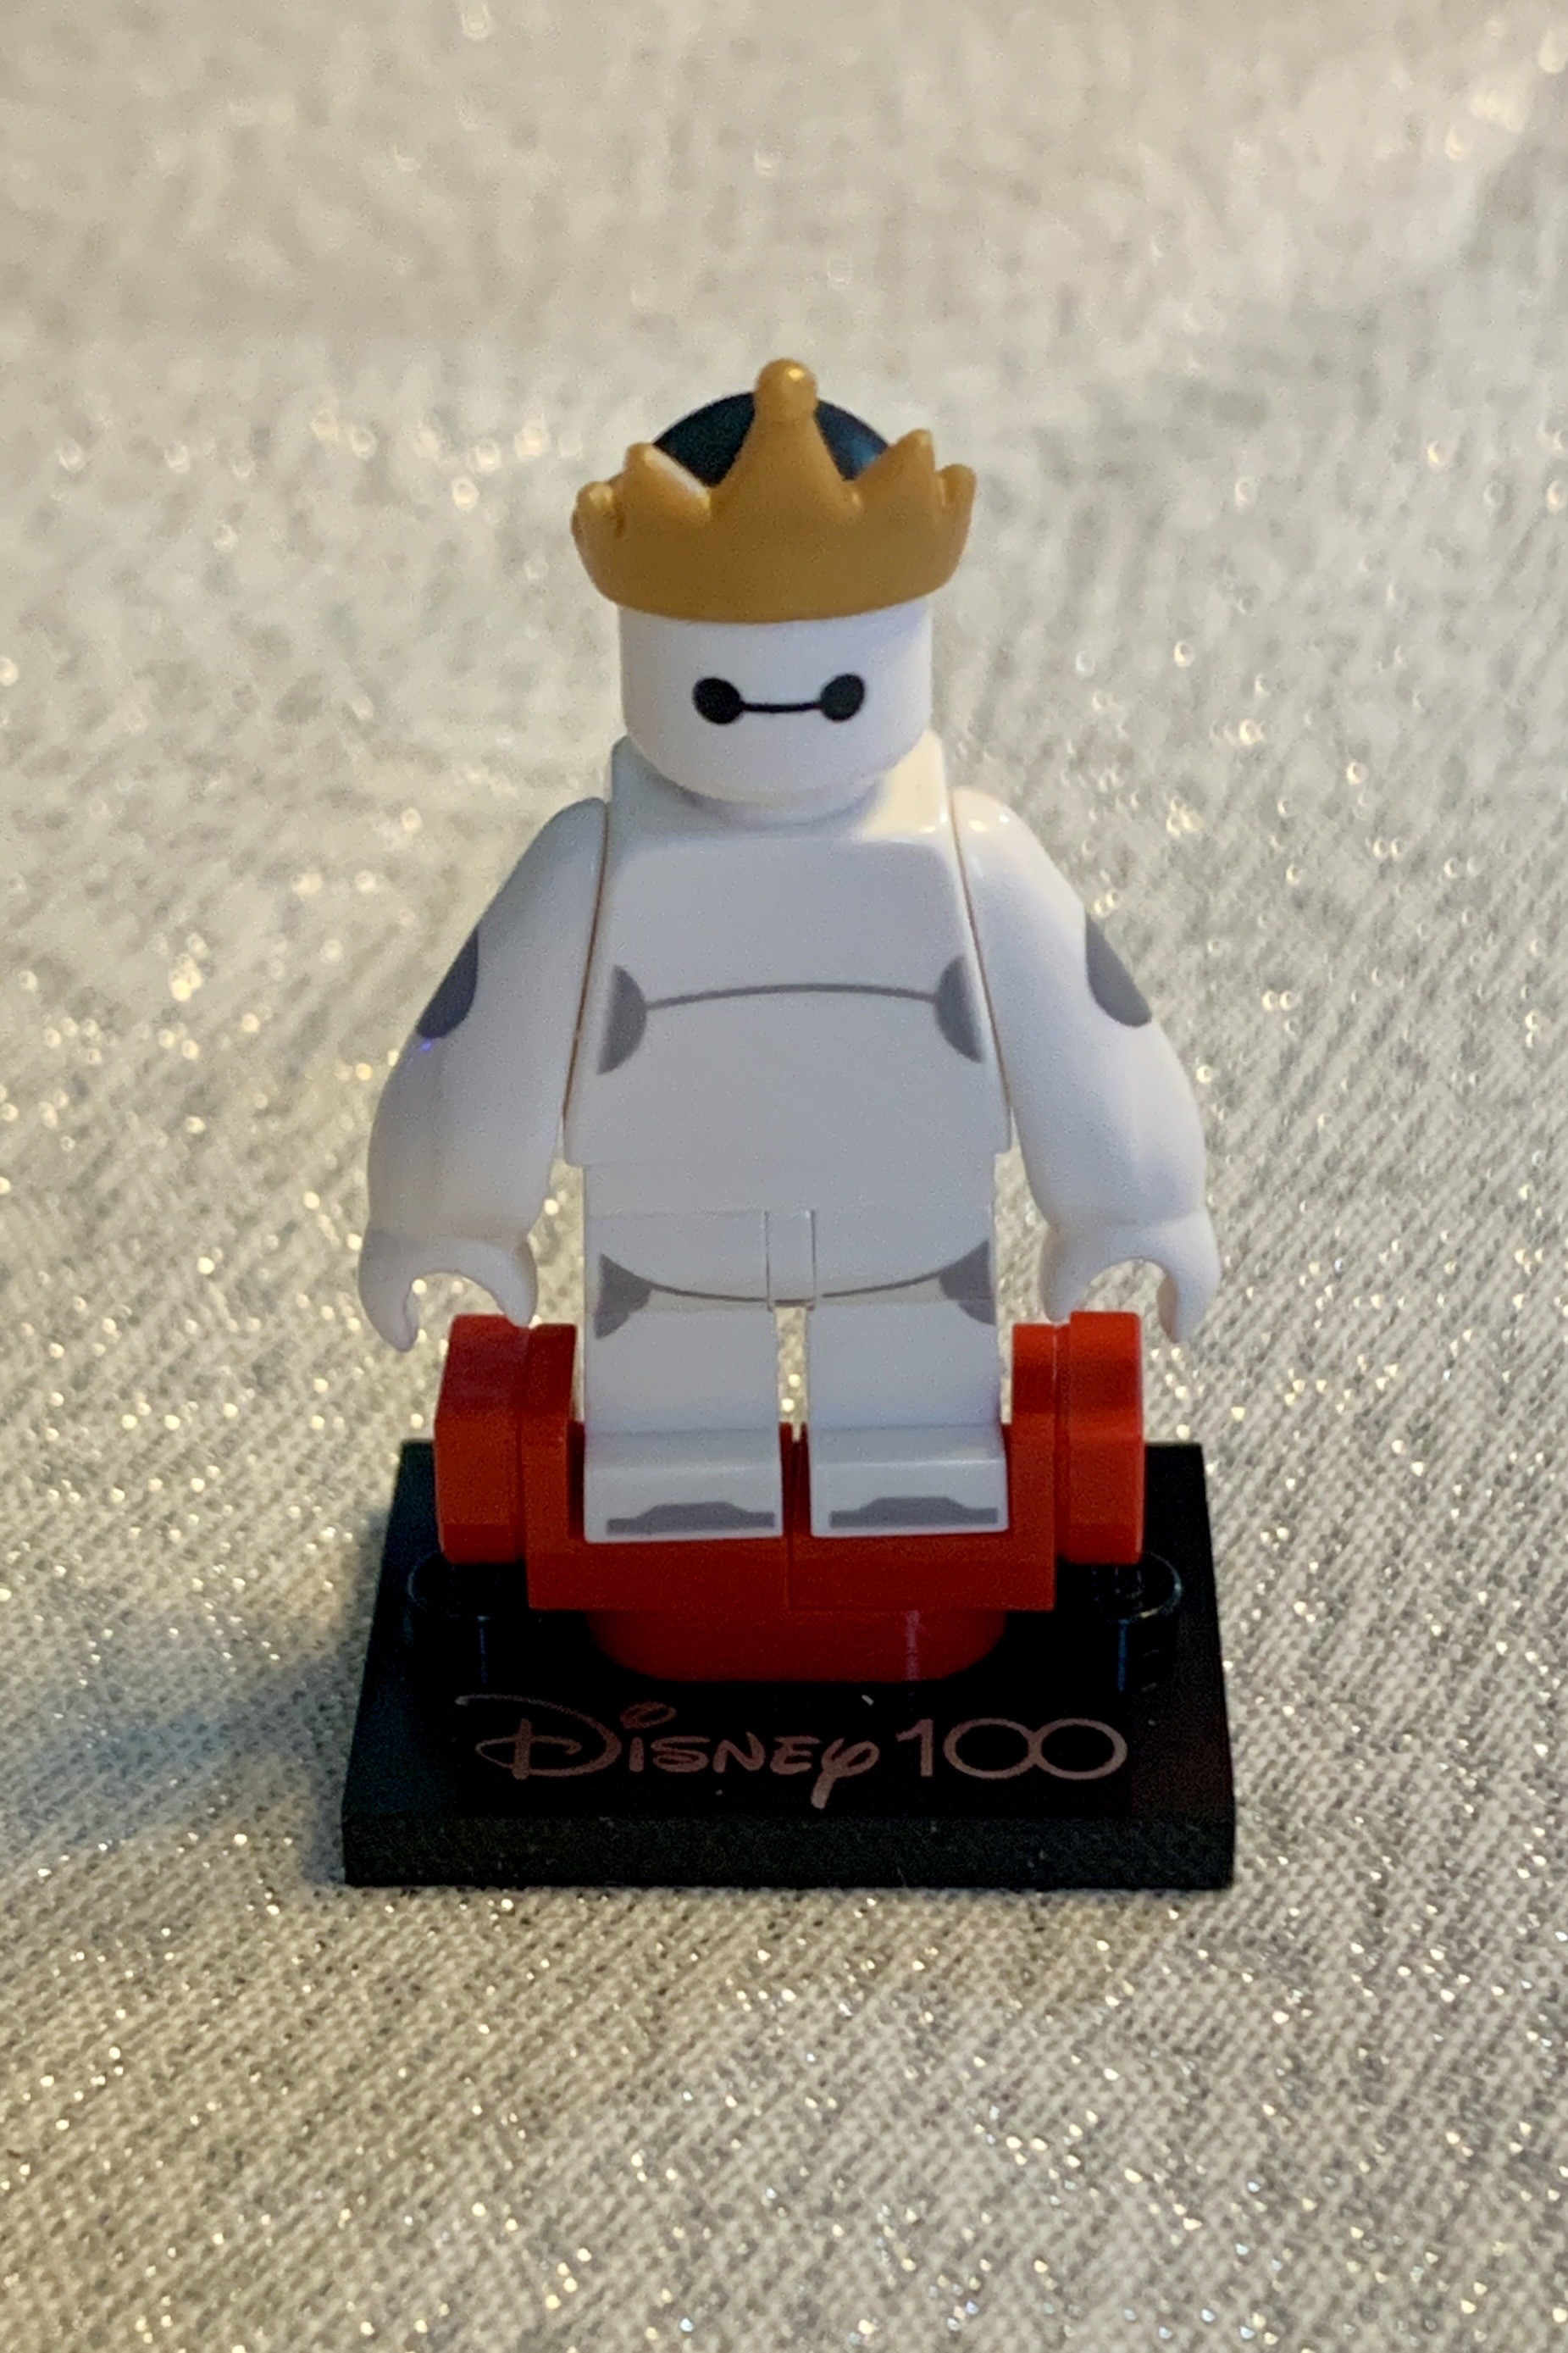 Lego Baymax minfigure wearing a gold crown, stood on a red stand